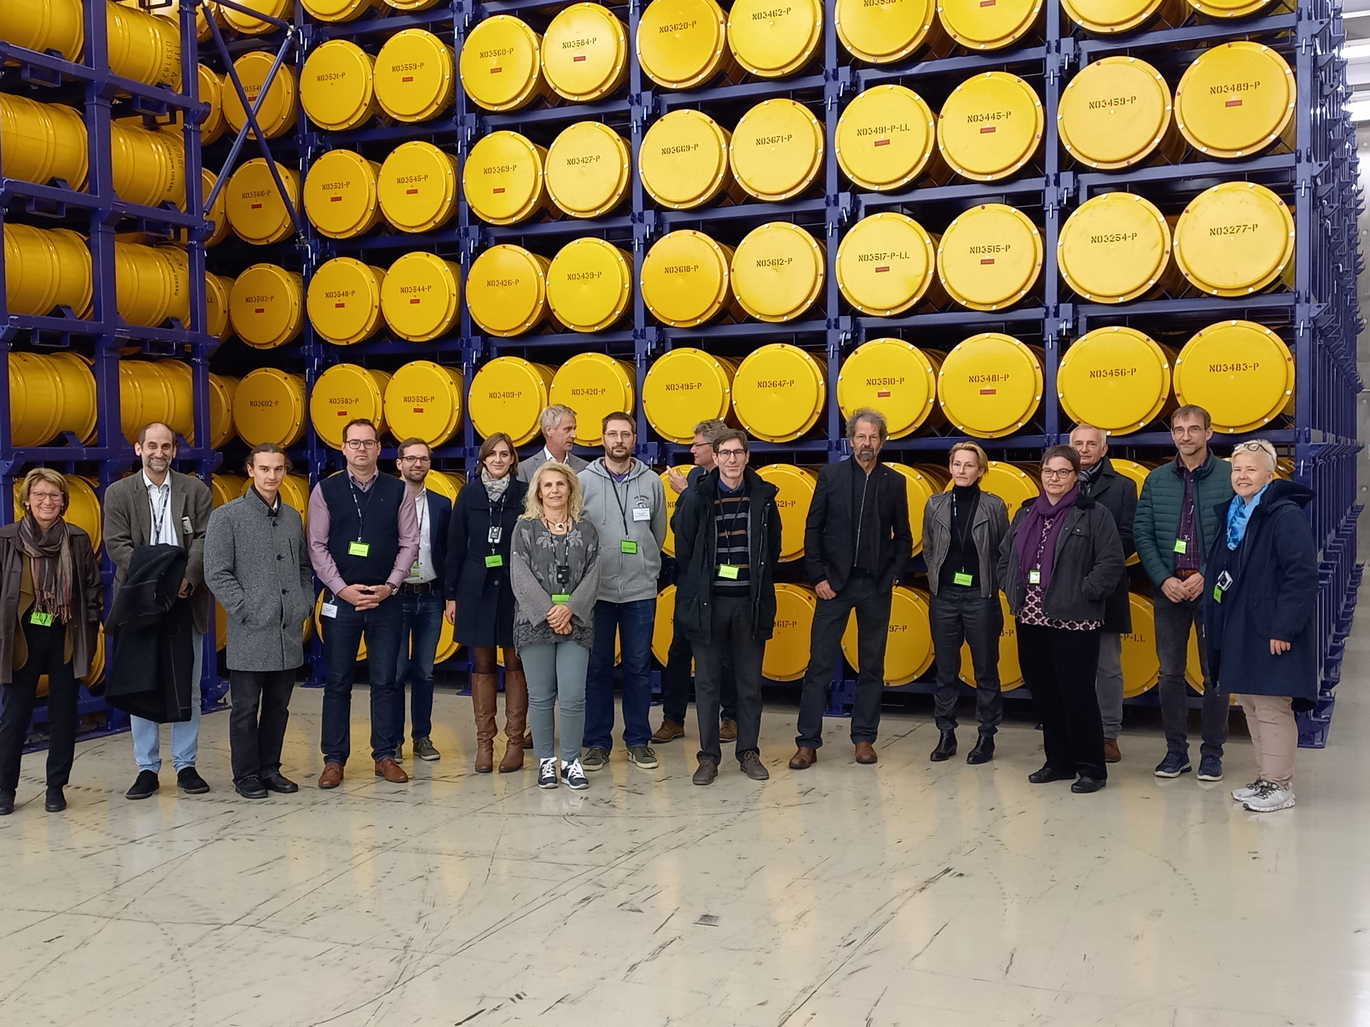 The members of the Austrian Board for Radioactive Waste Management at the tour of Nuclear Engineering Seibersdorf GmbH.